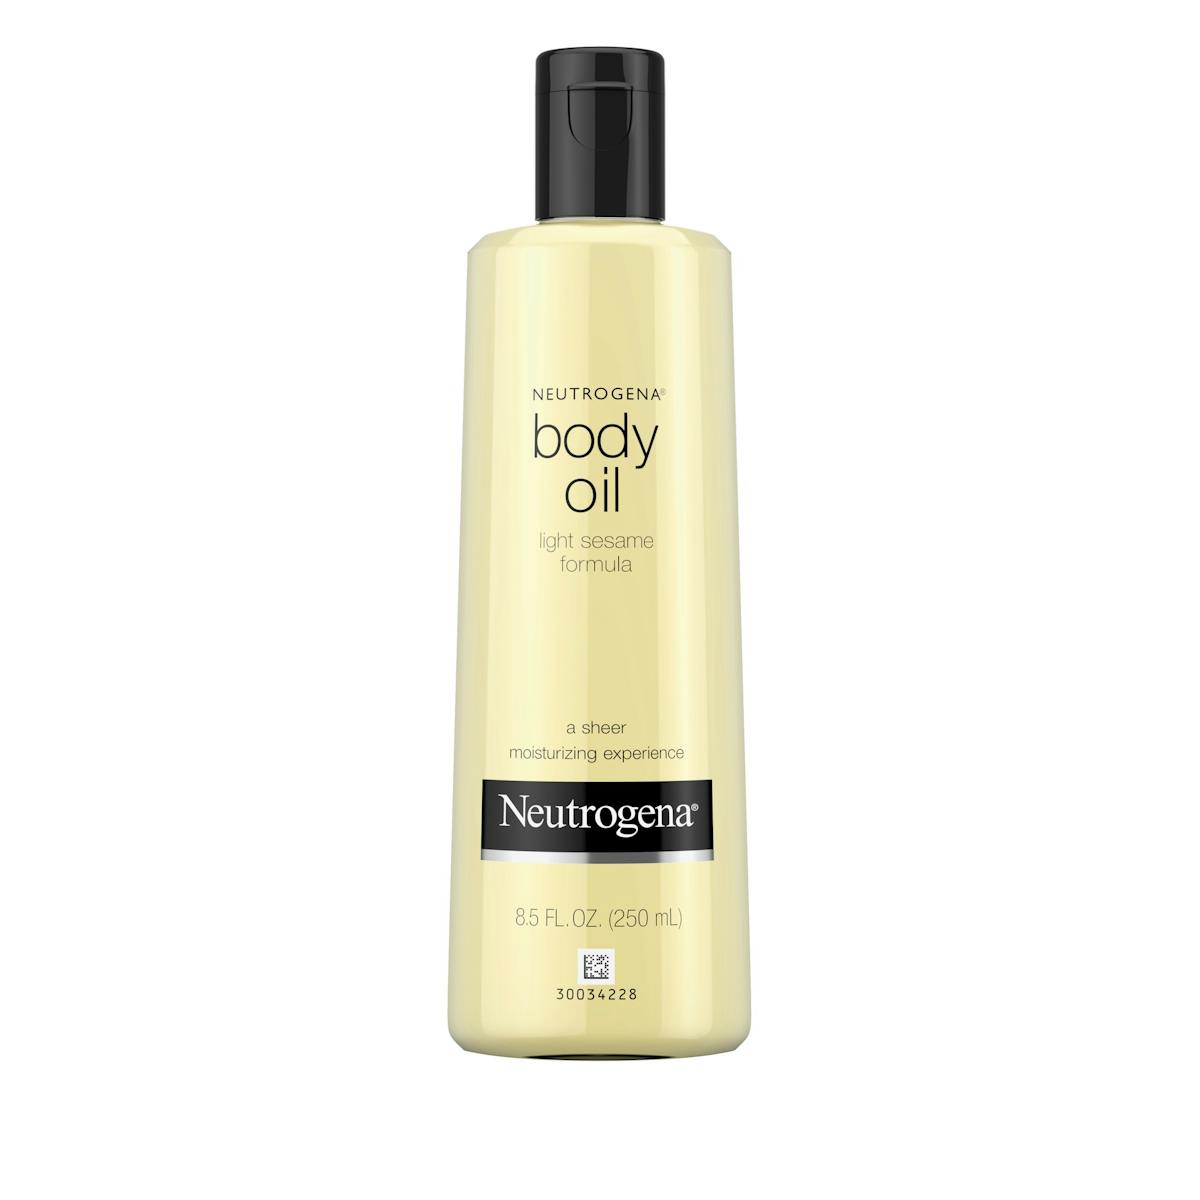  Dermanat Shimmering Dry Oil. Non-greasy, deeply nourishing Body  Oil. Sun kissed Glow with delicate sensual Fragrance. Paraben Free. 1.7 fl.  oz. : Beauty & Personal Care